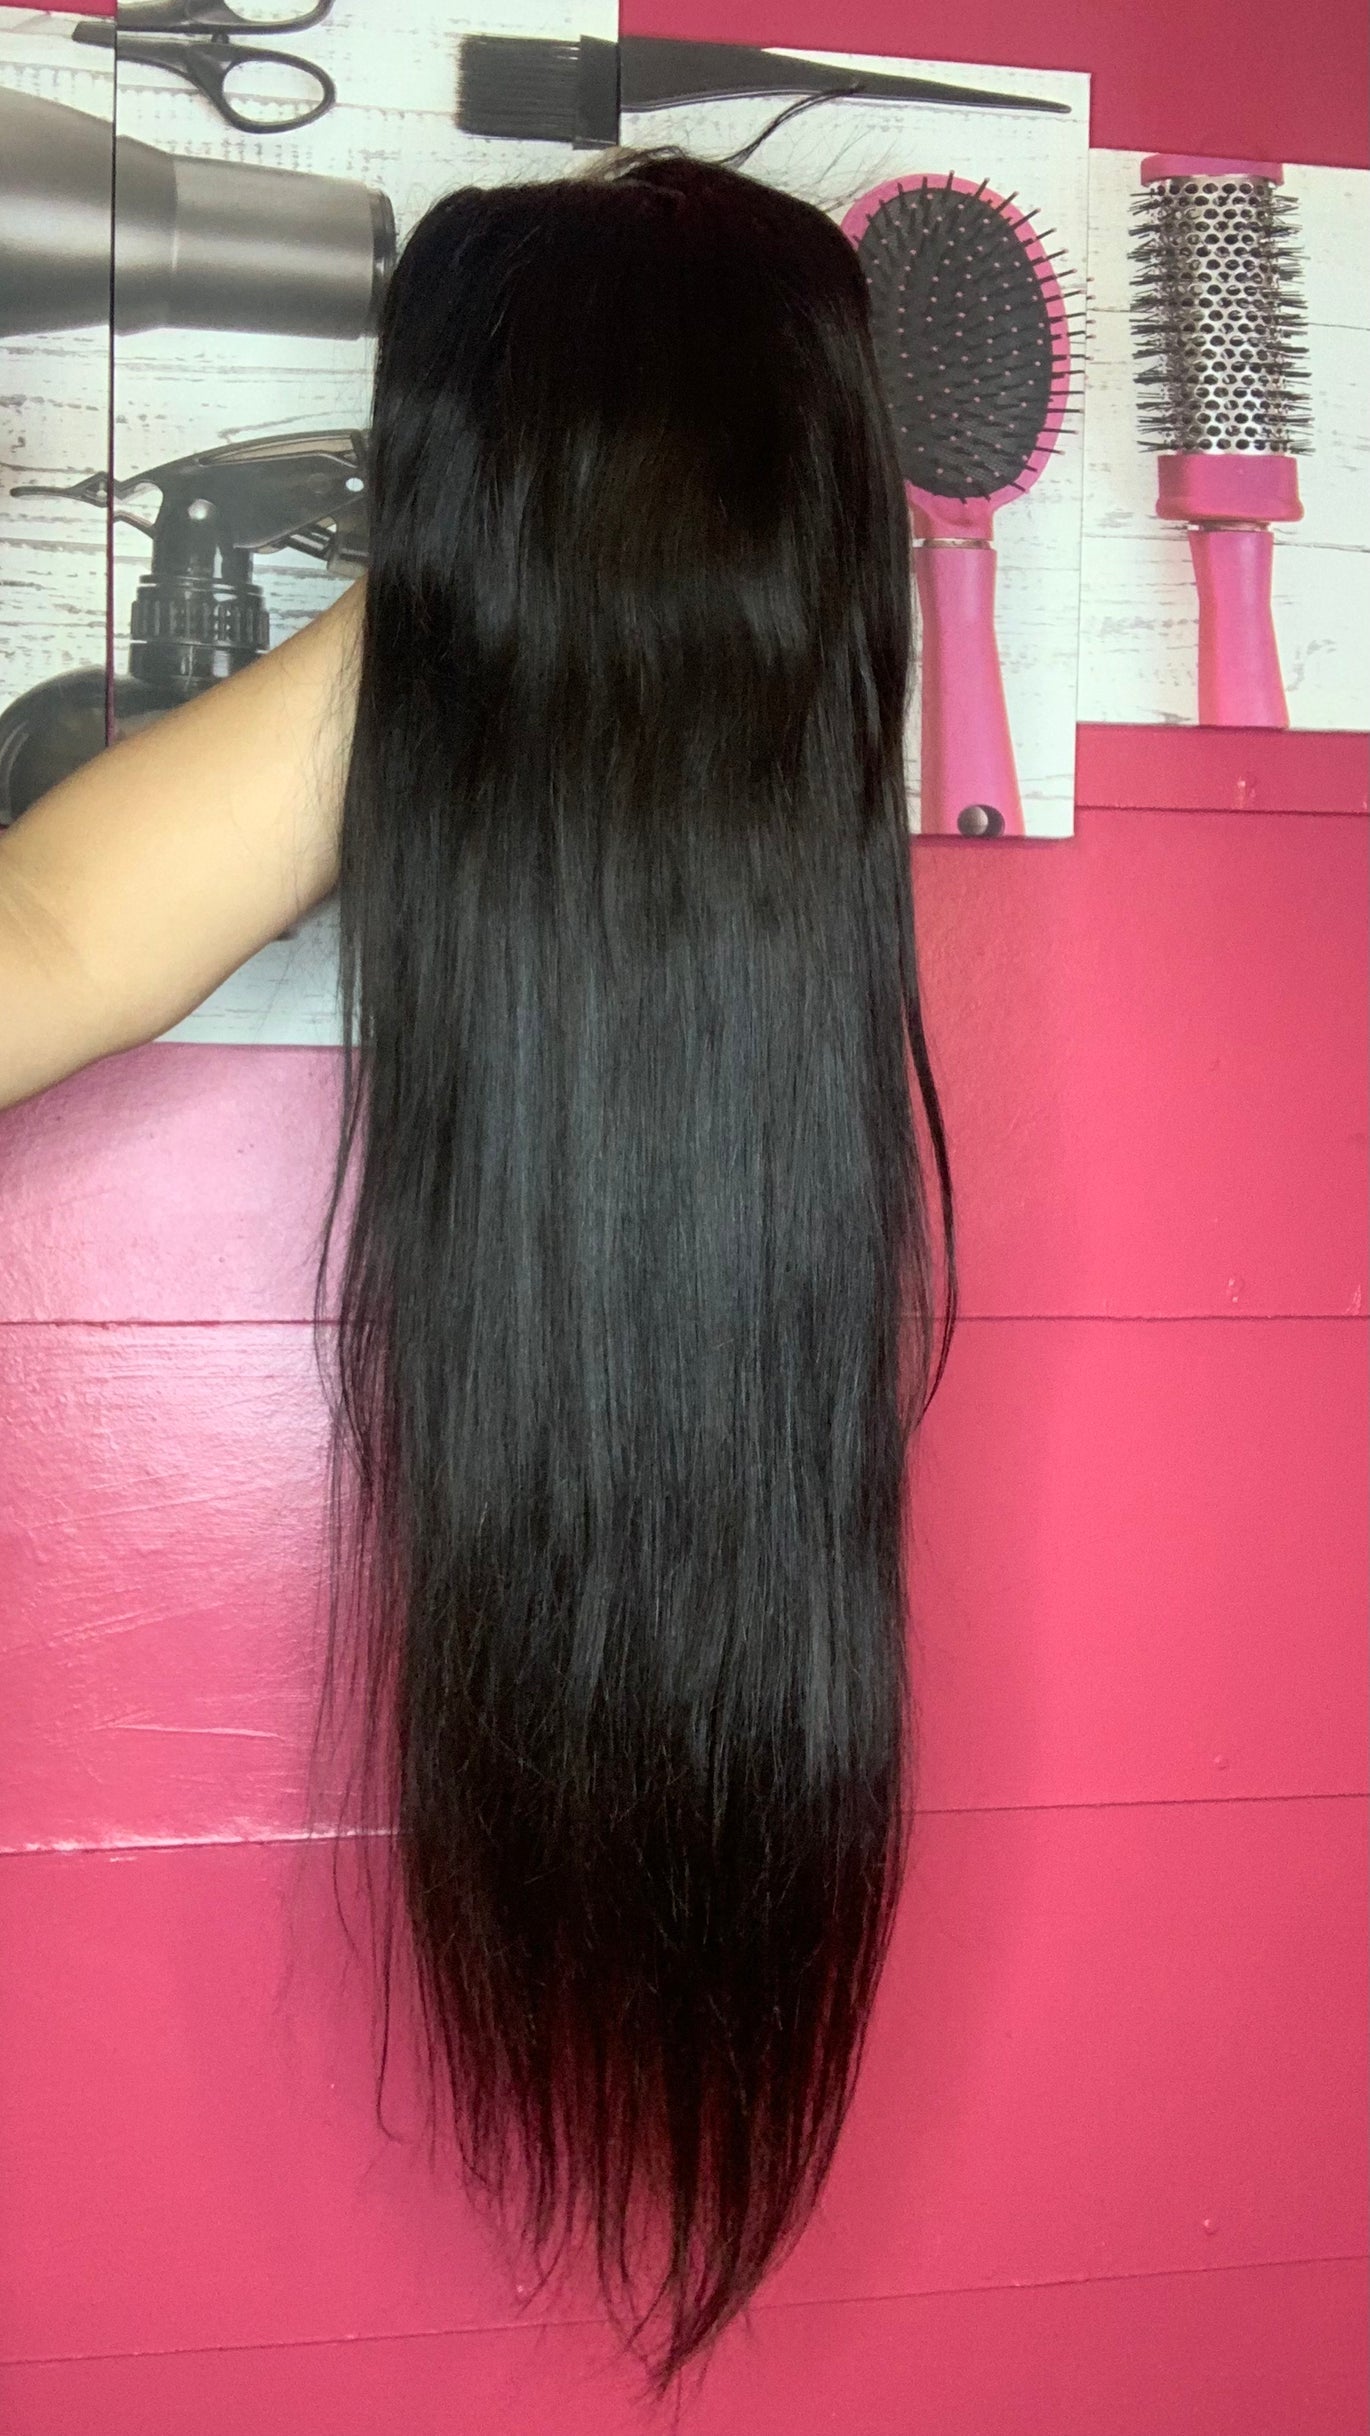 13x4 Lace Wig 30” Straight